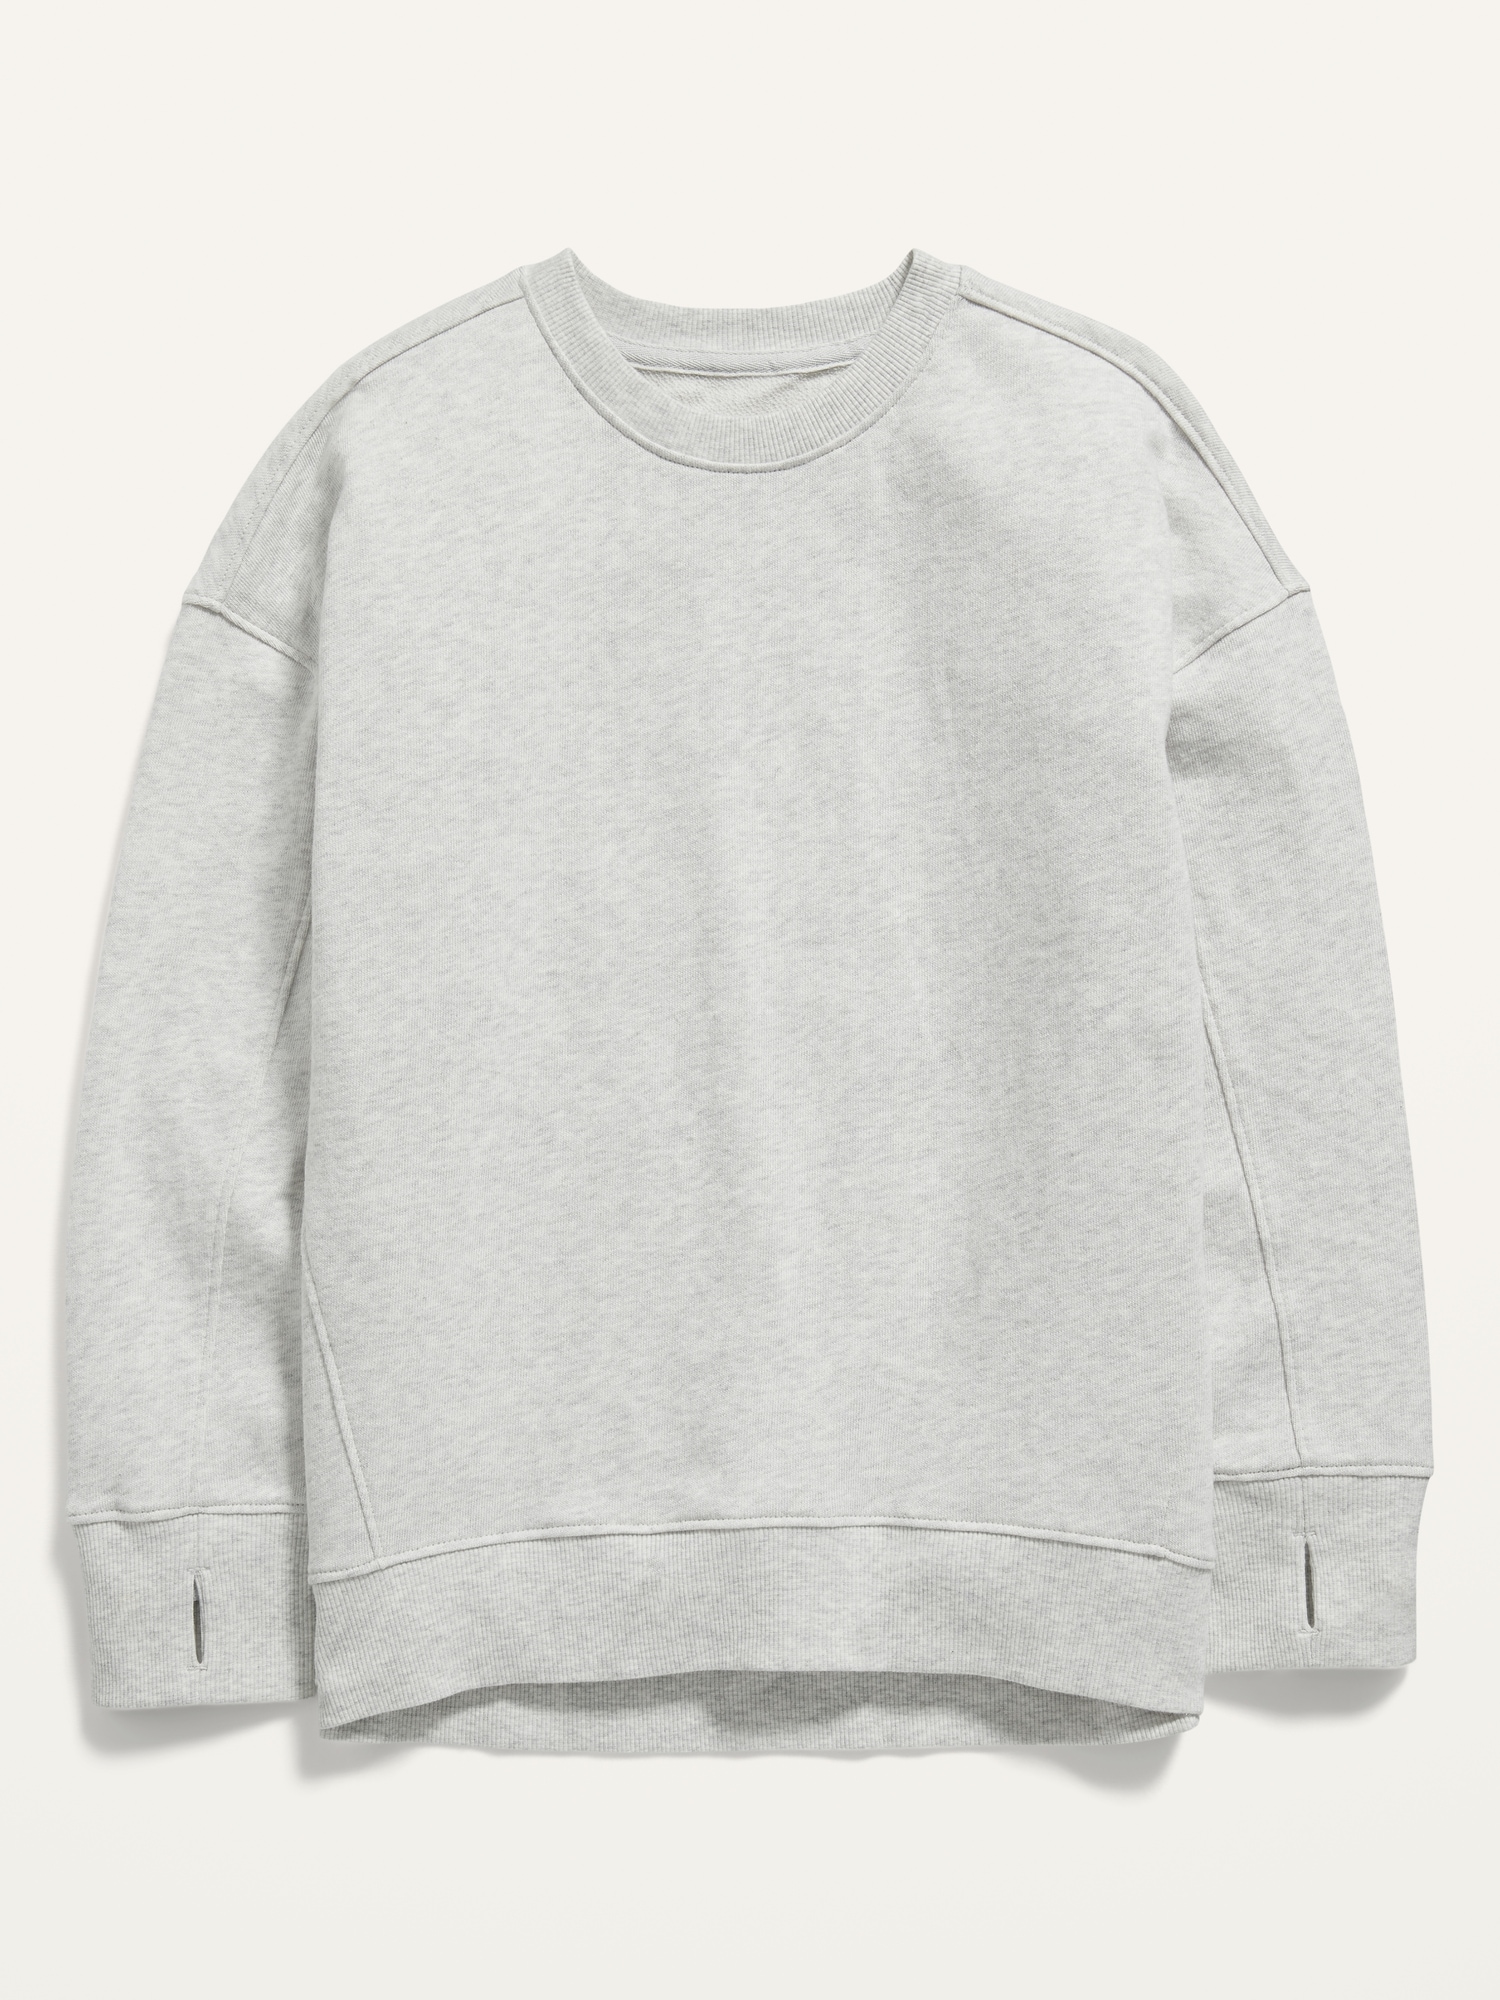 Oversized French Terry Hi-Lo Pullover Sweatshirt for Girls